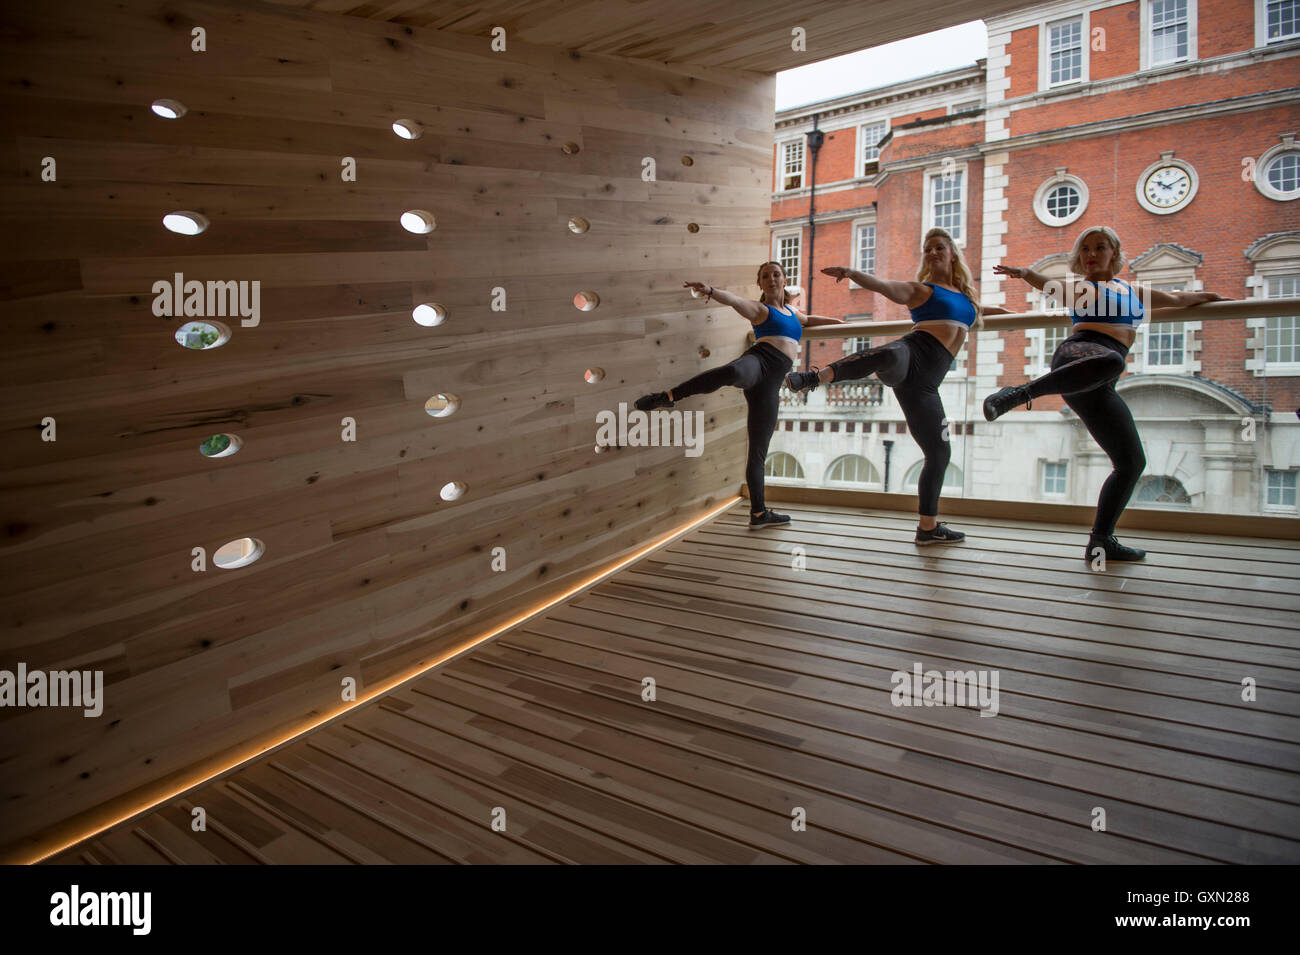 London, UK. 16th September, 2016. Preview of London Design Festival projects. The Smile is a Landmark Project designed by Alison Brooks Architects and engineered by Arup installed at Chelsea College of Arts. A massive hardwood structure constructed from American tulipwood. Credit:  artsimages/Alamy Live News. Stock Photo